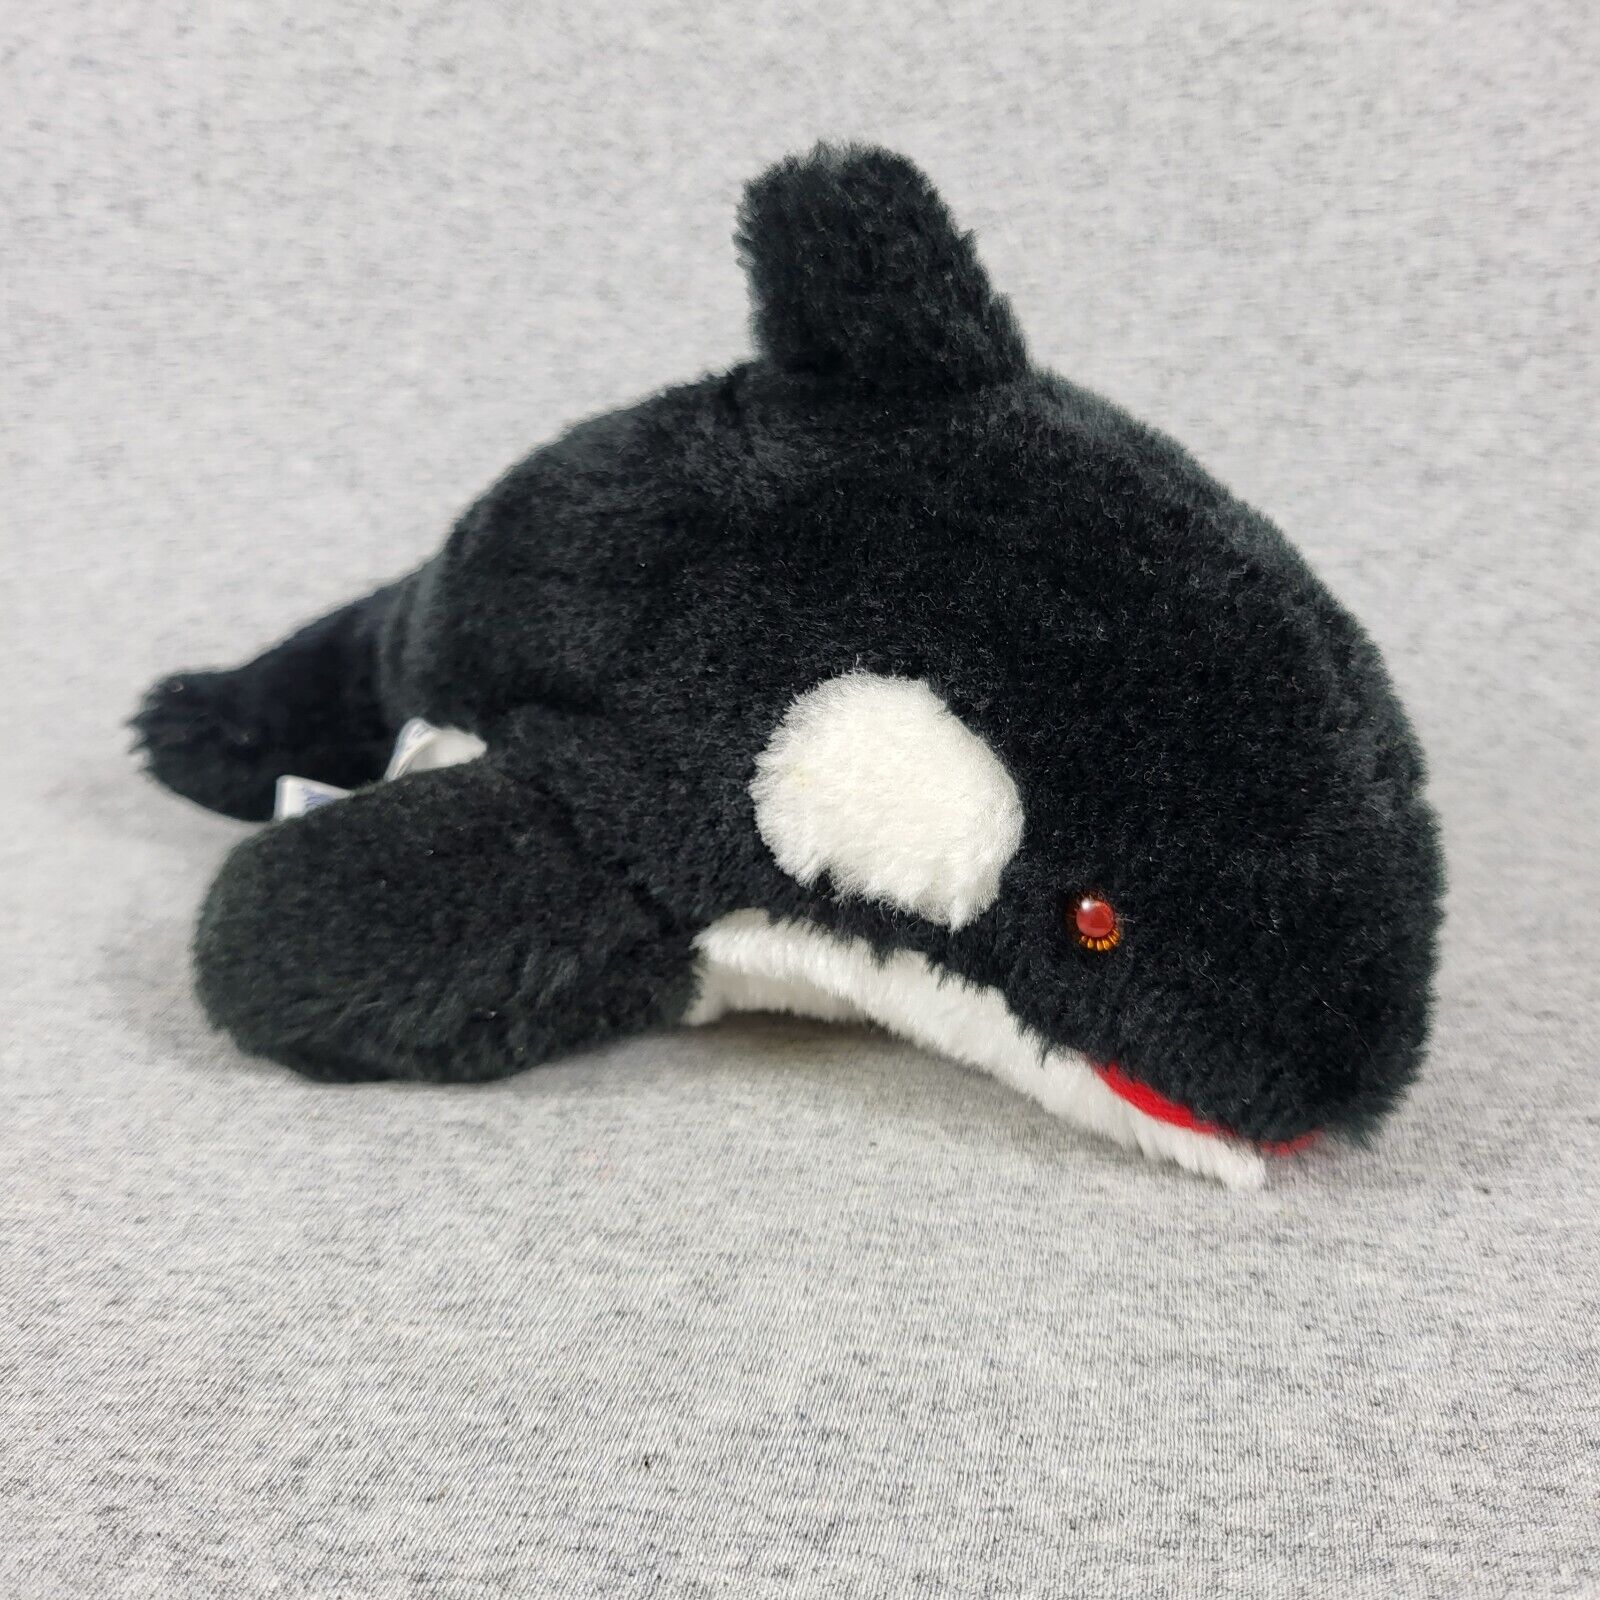 Vintage 1986 Sea World Orca Killer Whale Plush 10 inches Shamu With Red Eyes